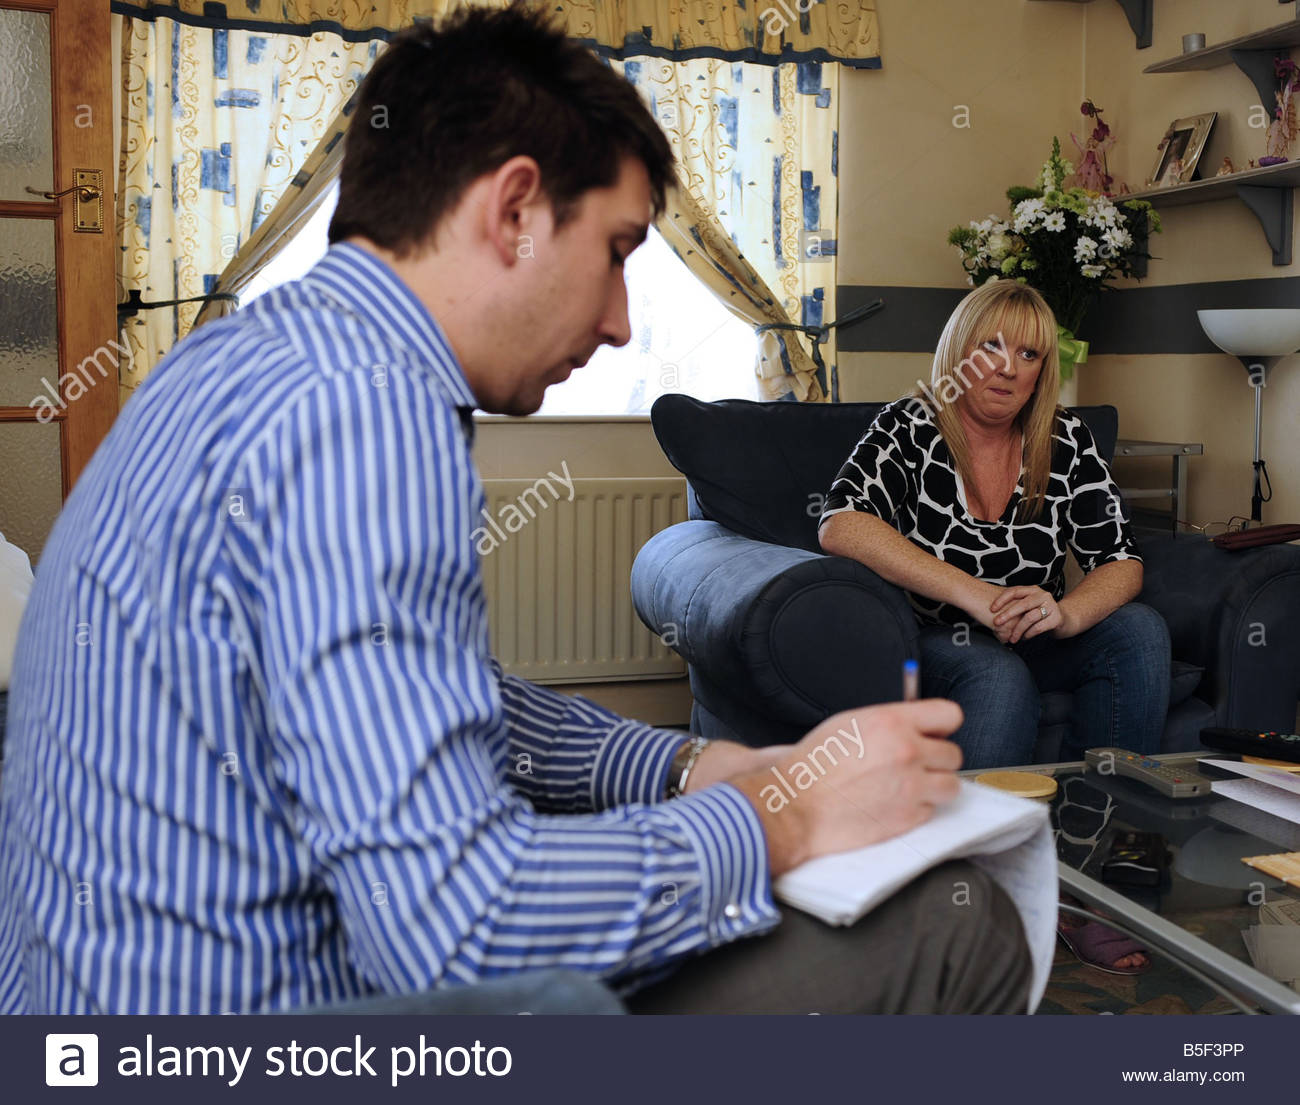 The Guilty Murderer Stock Photos & The Guilty Murderer Stock Images - Alamy1300 x 1105